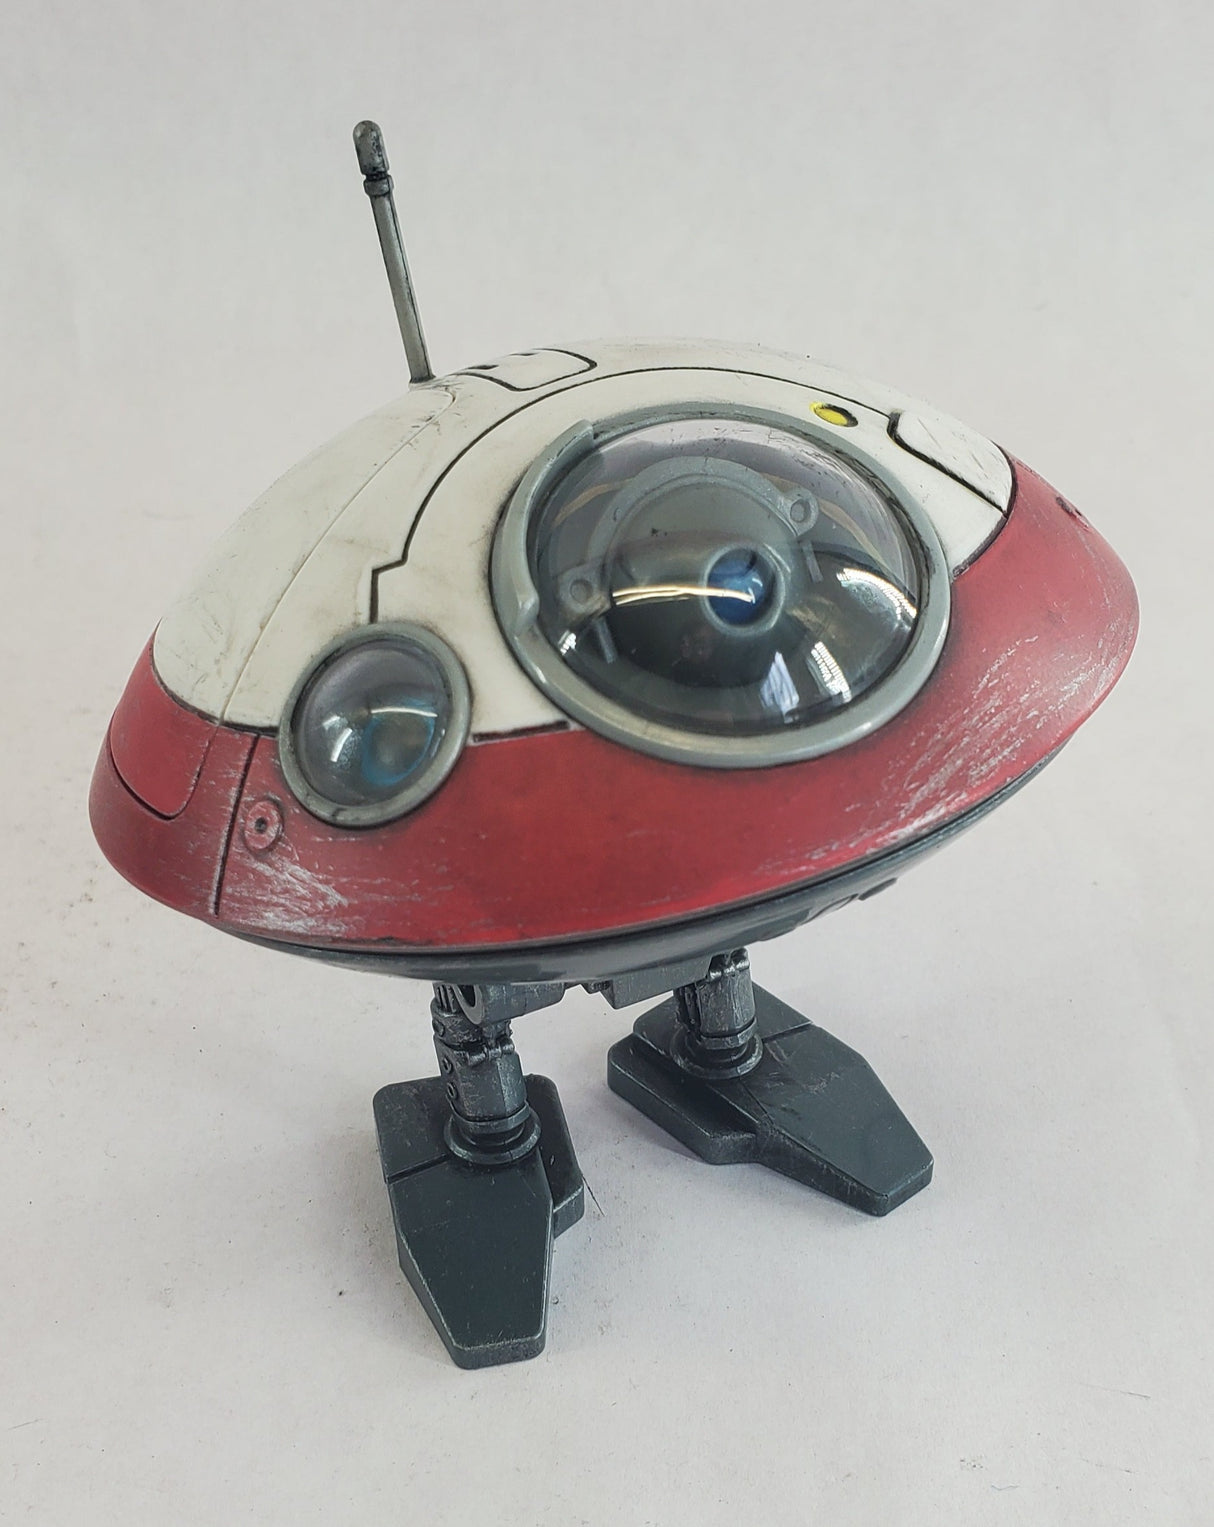 Lola Droid Full Size Prop